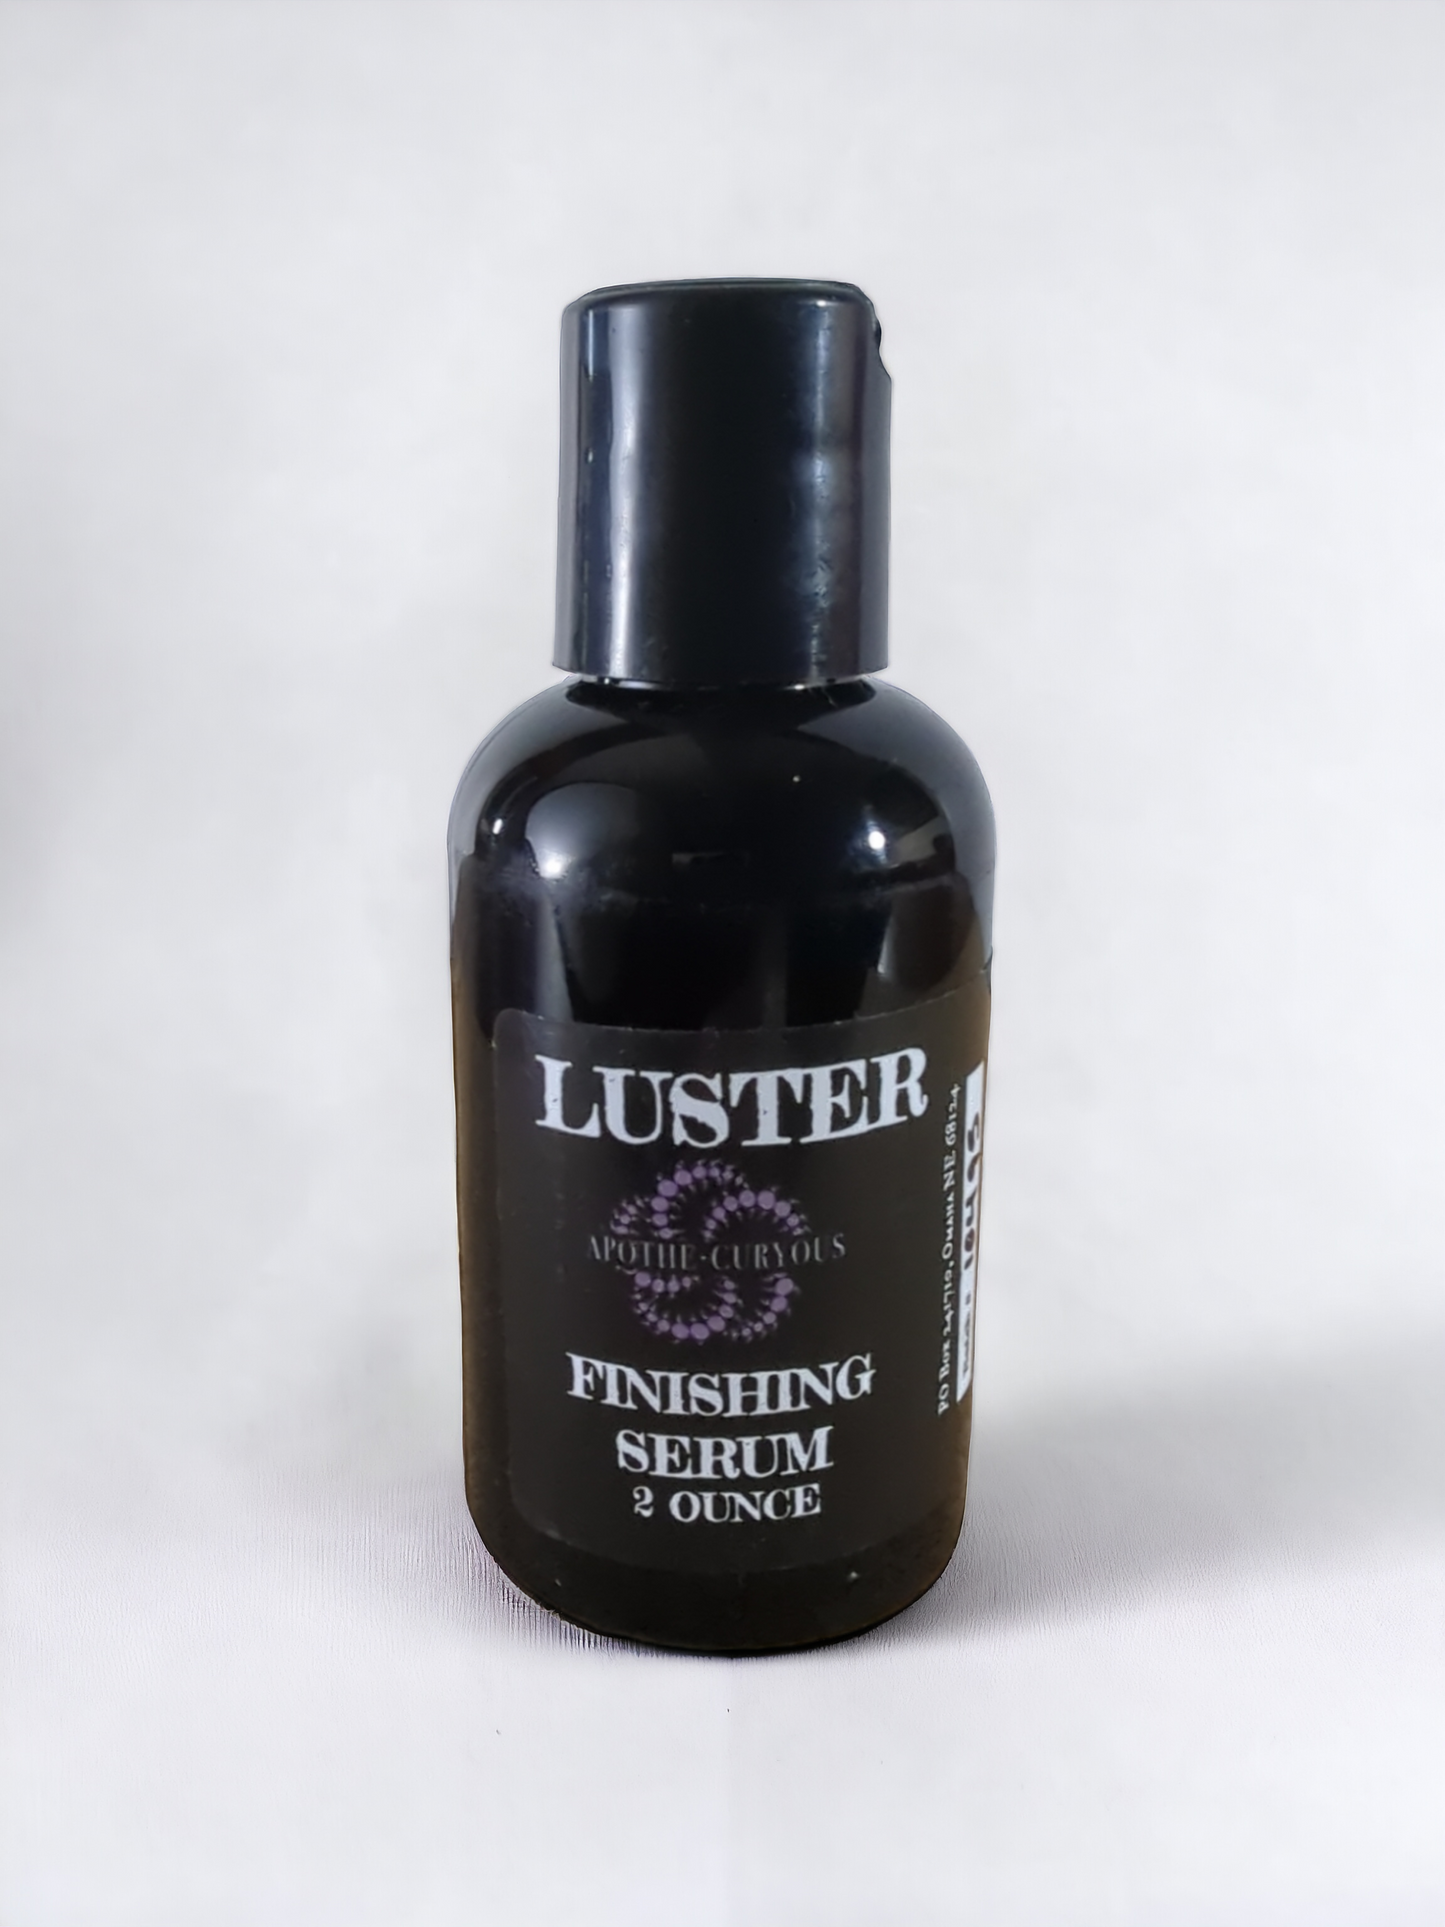 Luster Finishing Serum (discontinued)